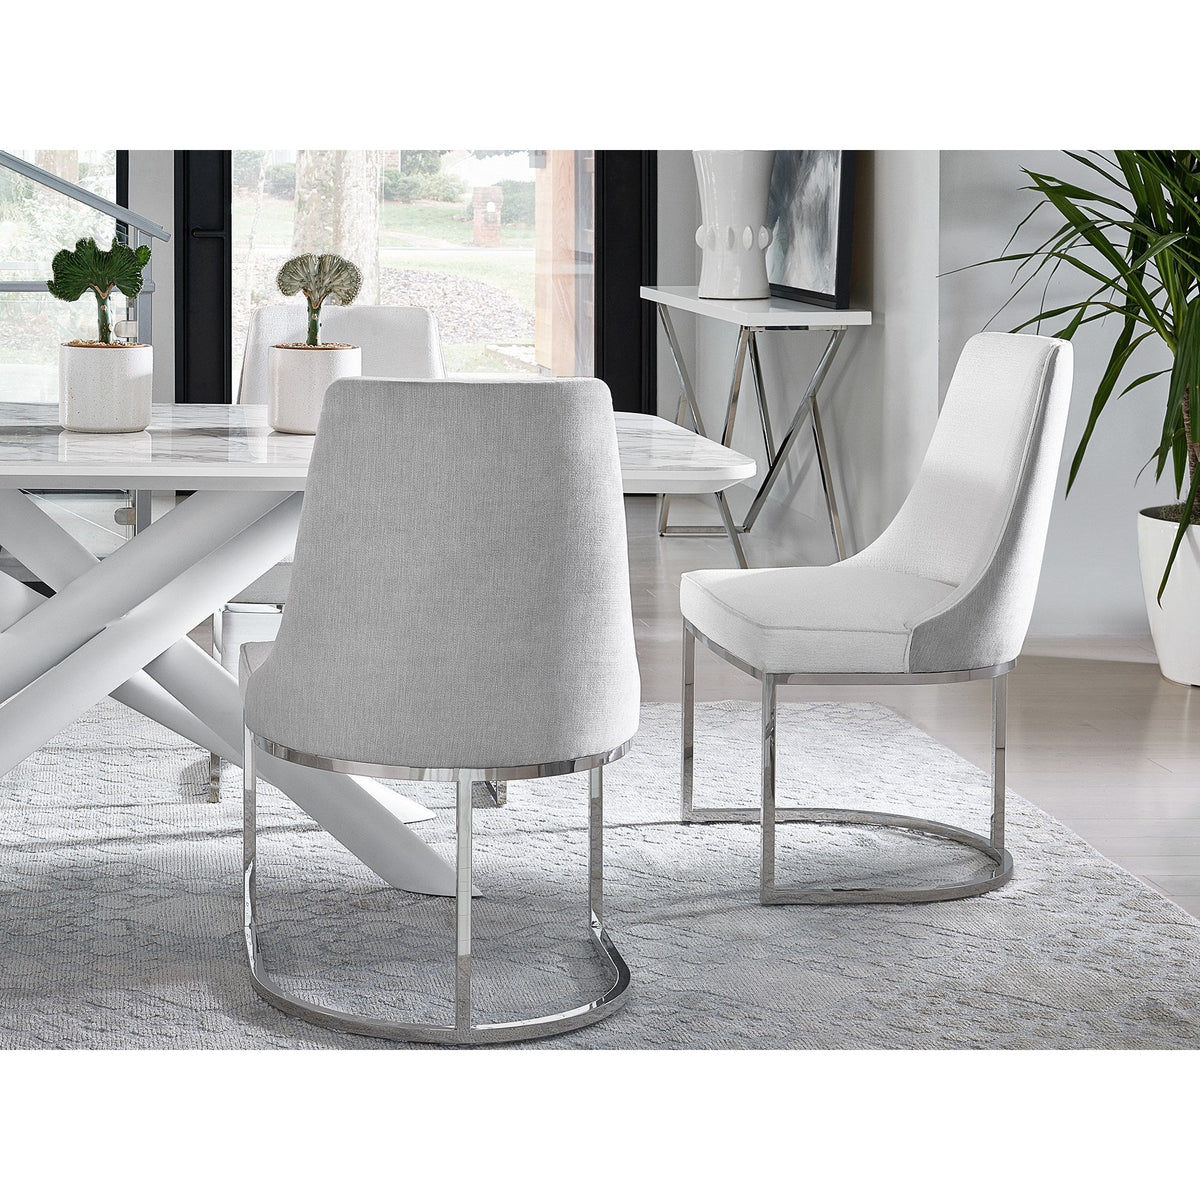 Colt Dining Chair - Be Bold Furniture